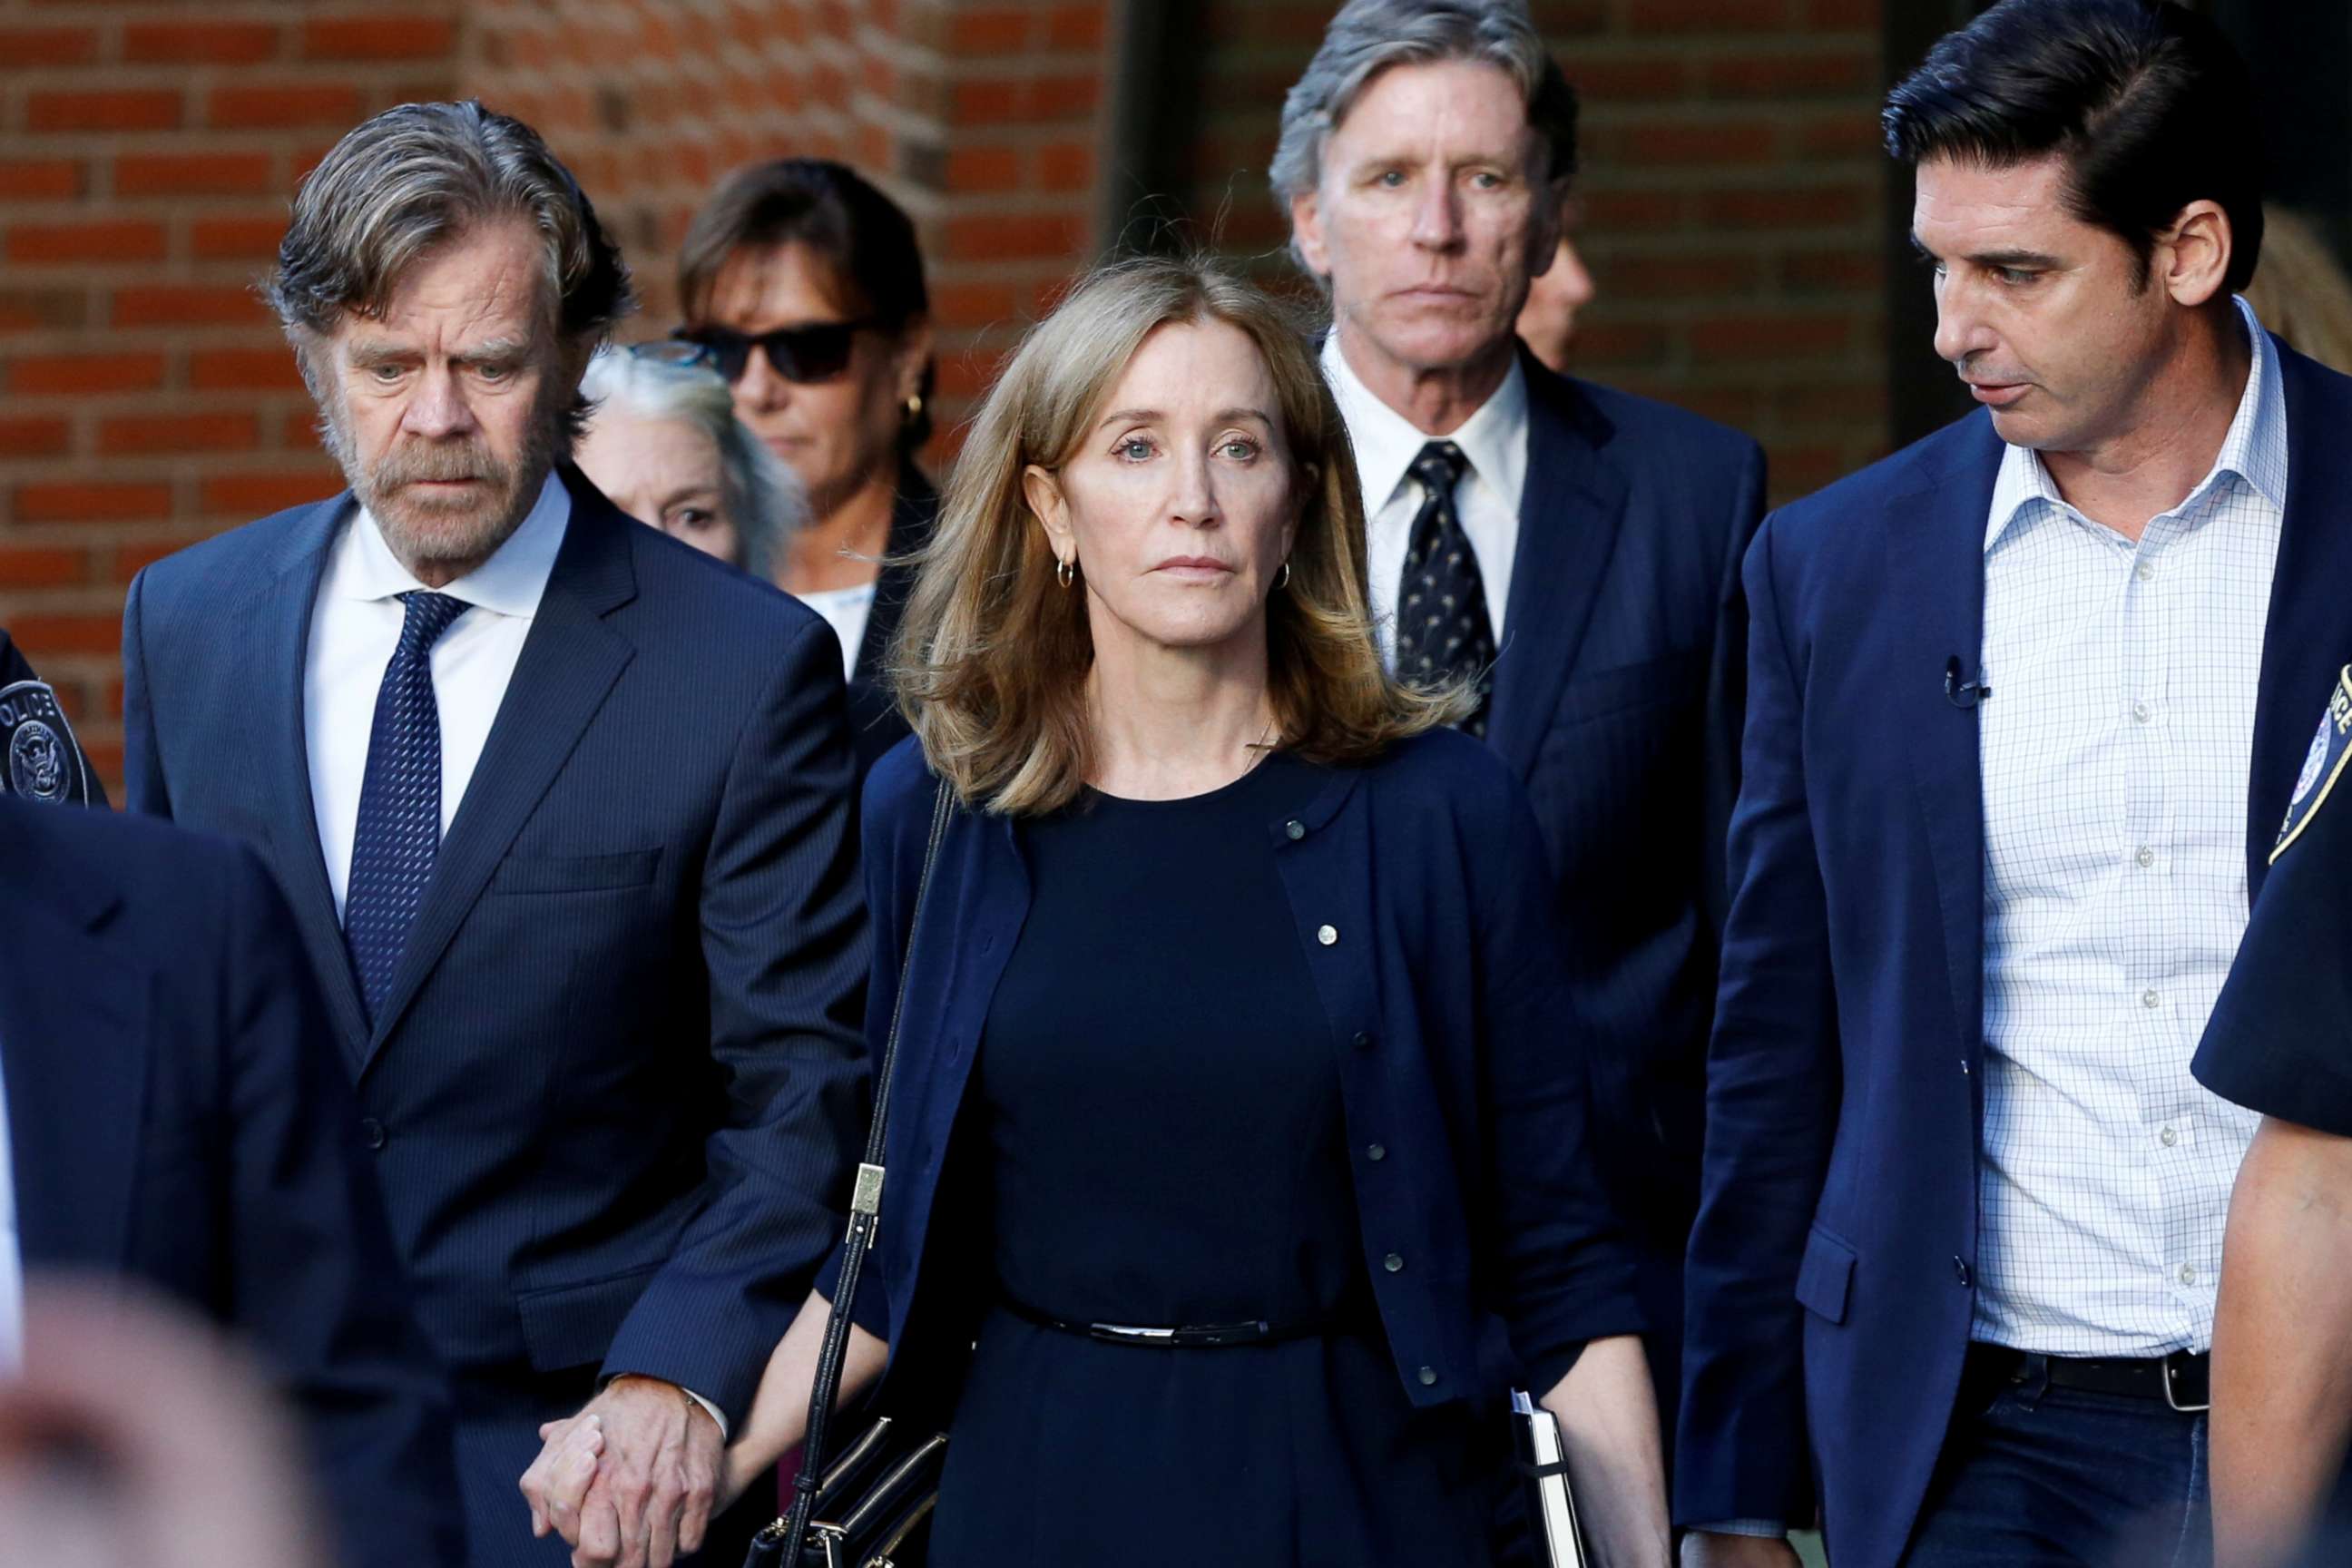 PHOTO: Actress Felicity Huffman, center, leaves the federal courthouse with her husband William H. Macy after being sentenced in connection with a nationwide college admissions cheating scheme in Boston, M.A., on Sept. 13, 2019.